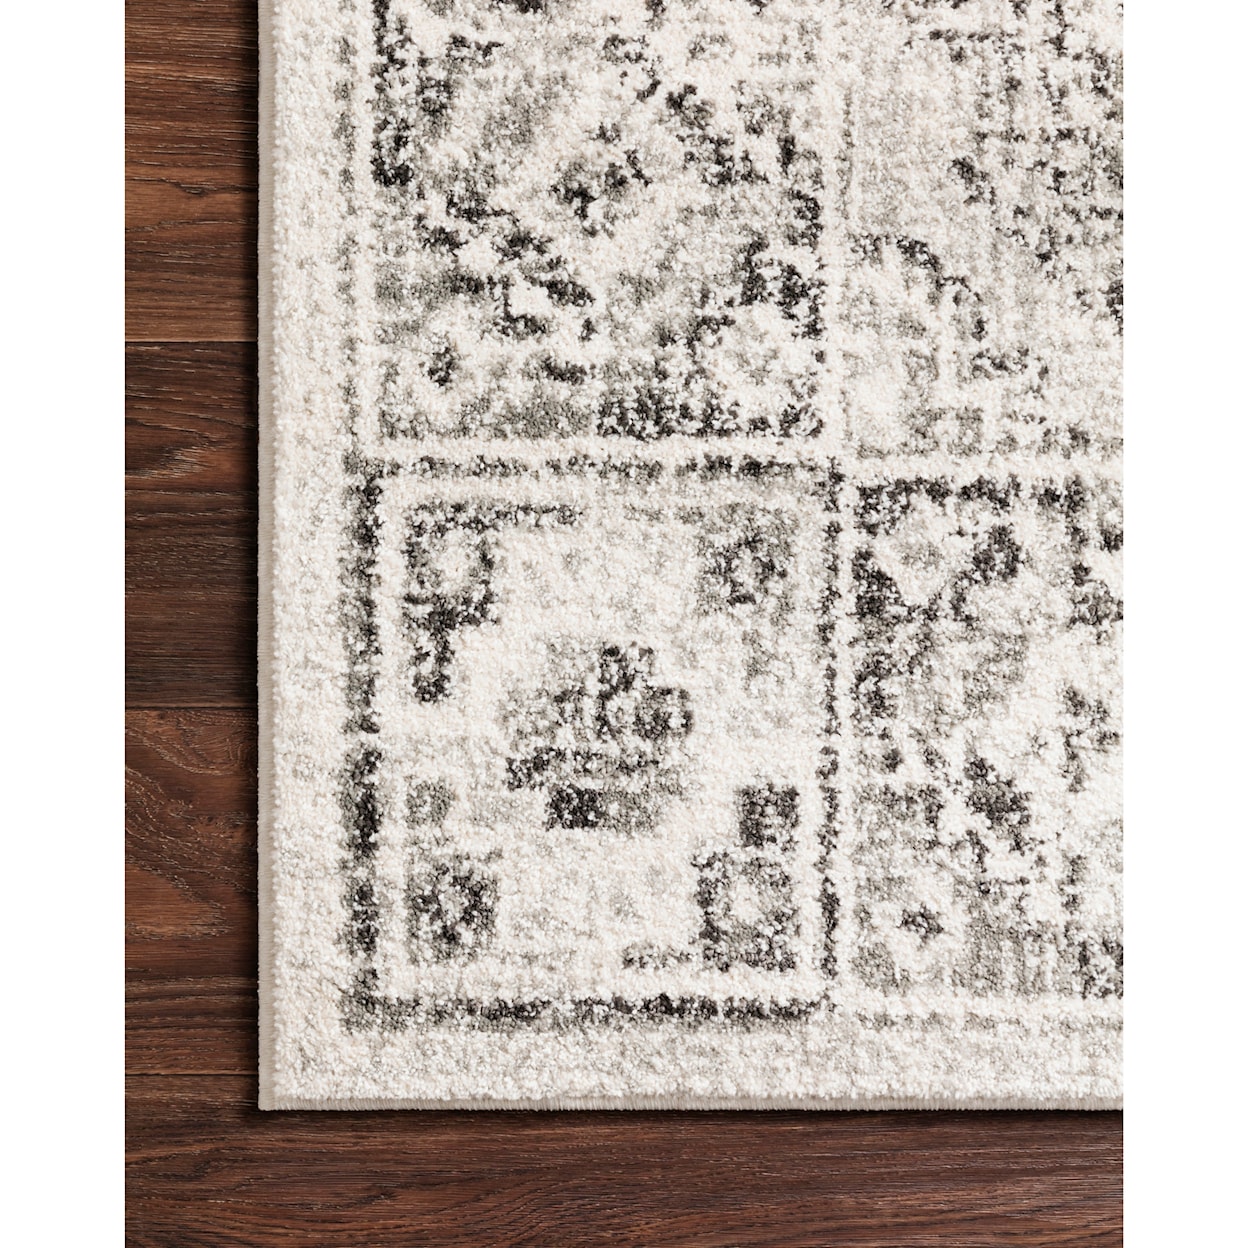 Reeds Rugs Joaquin 6'7" x 9'2" Ivory / Charcoal Rug